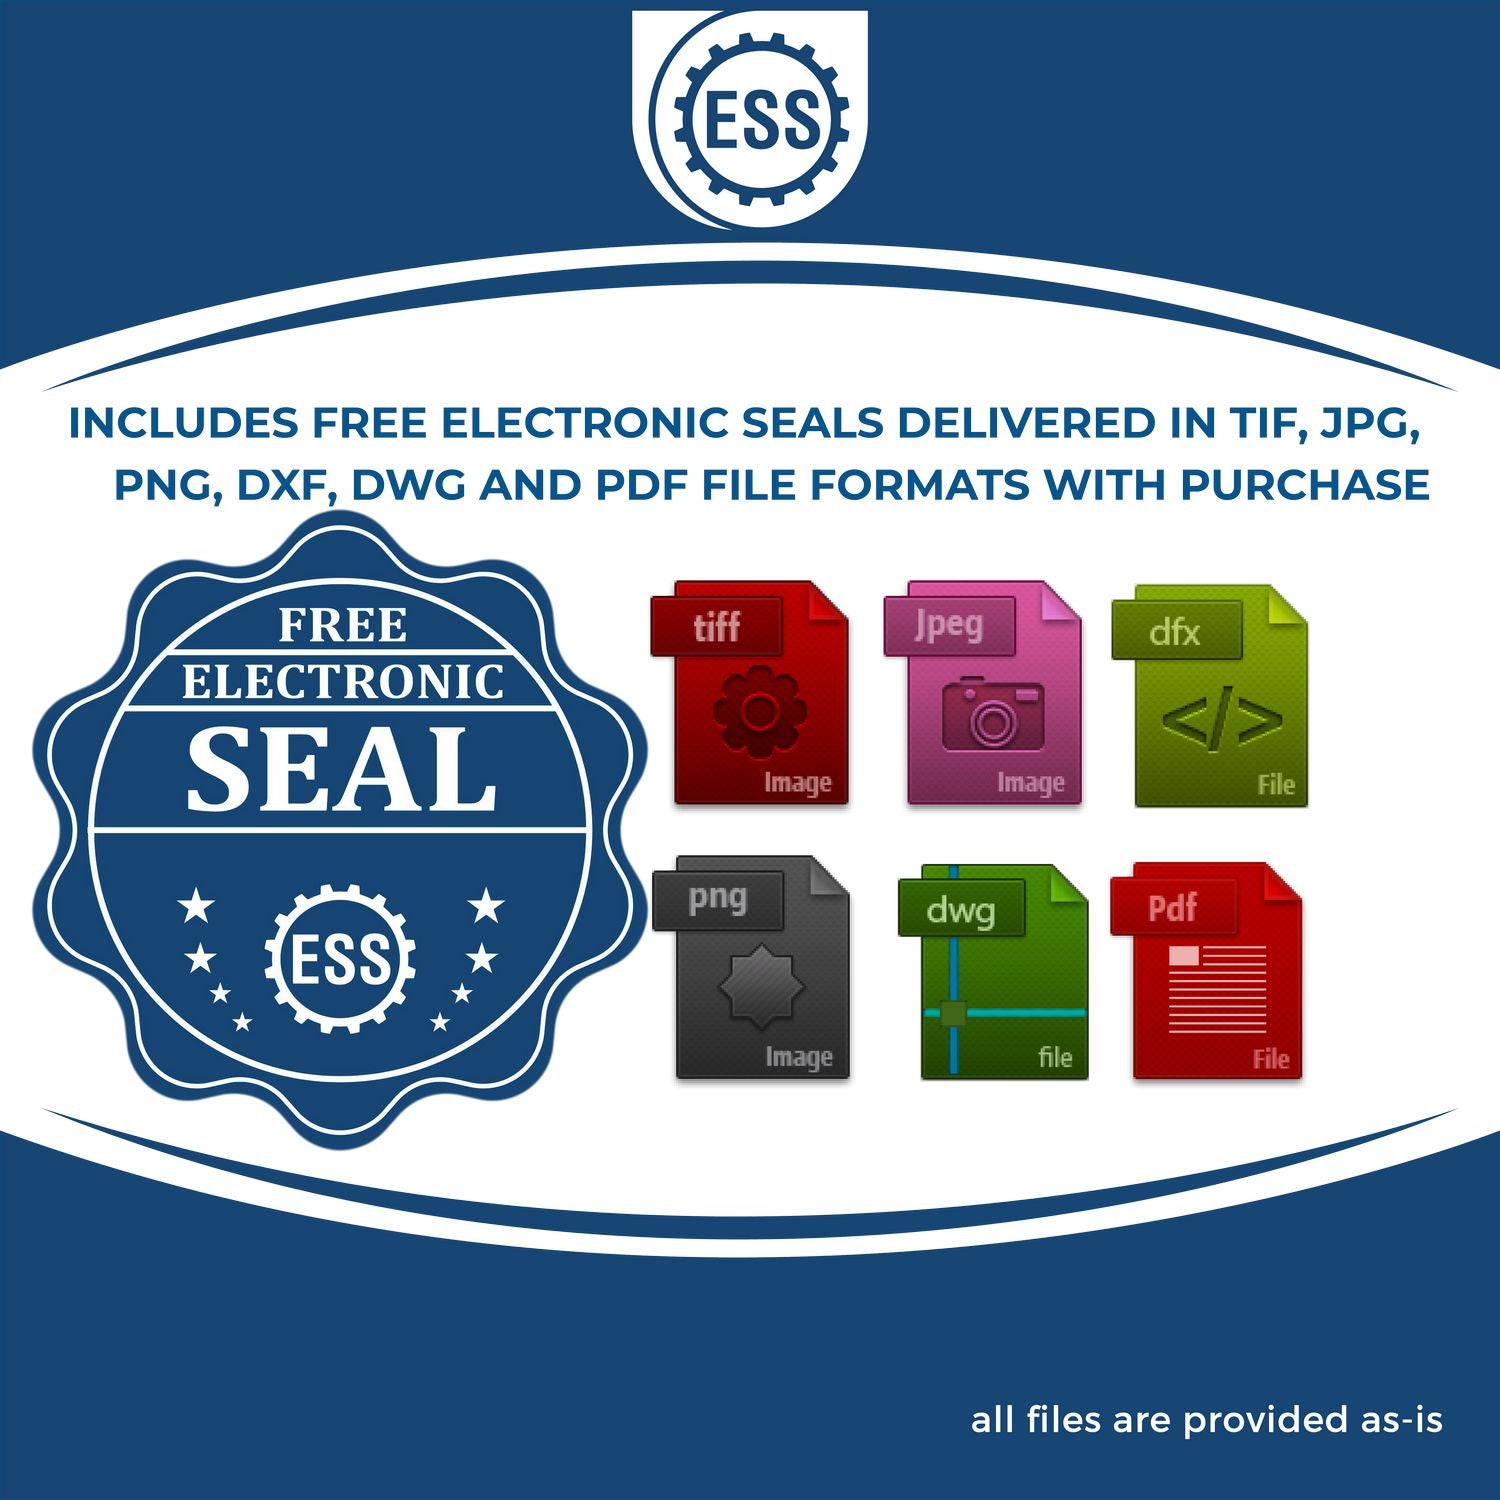 An infographic for the free electronic seal for the South Dakota Professional Engineer Seal Stamp illustrating the different file type icons such as DXF, DWG, TIF, JPG and PNG.